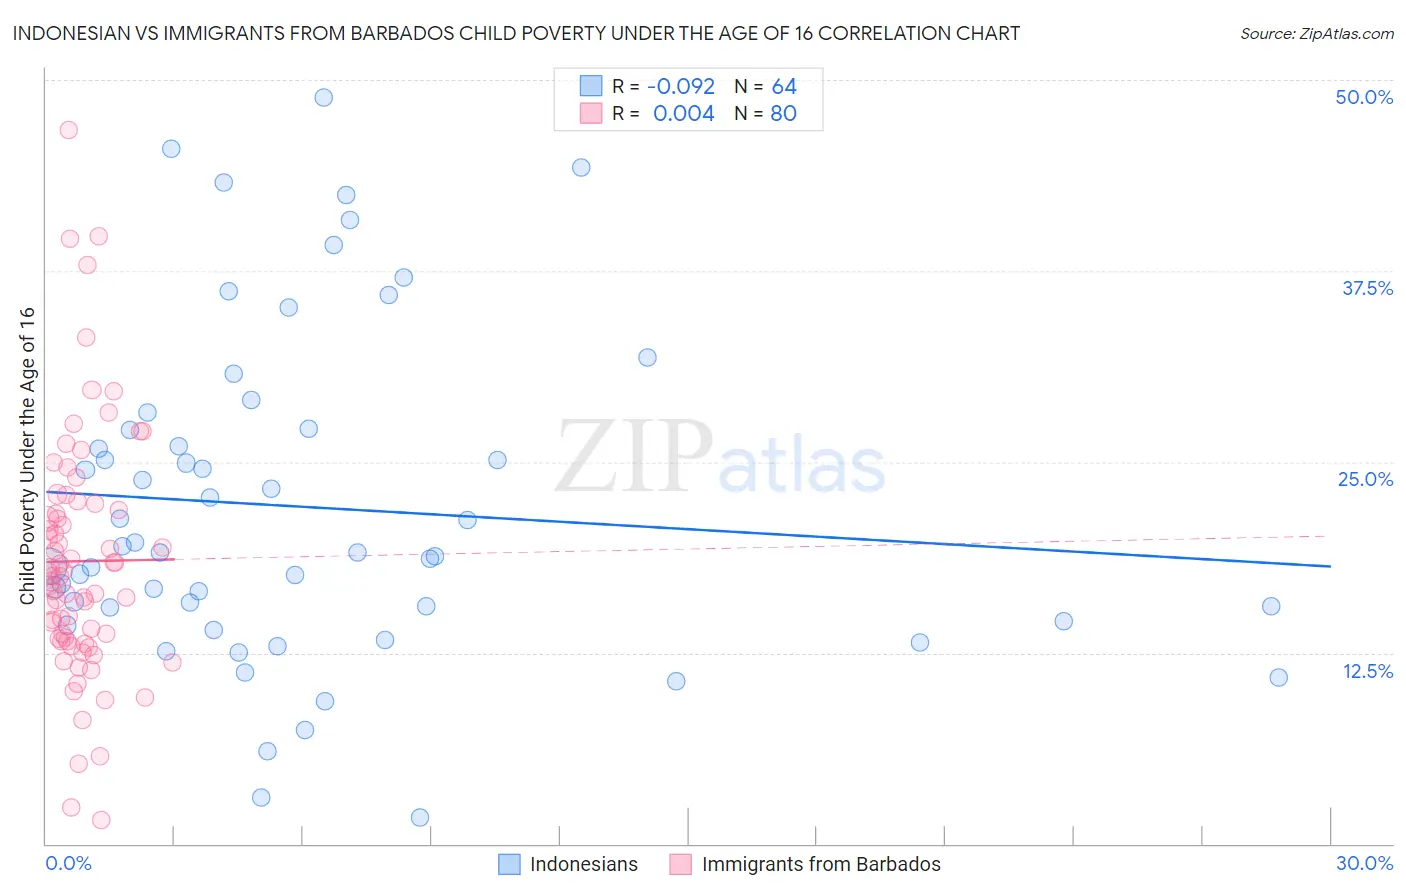 Indonesian vs Immigrants from Barbados Child Poverty Under the Age of 16